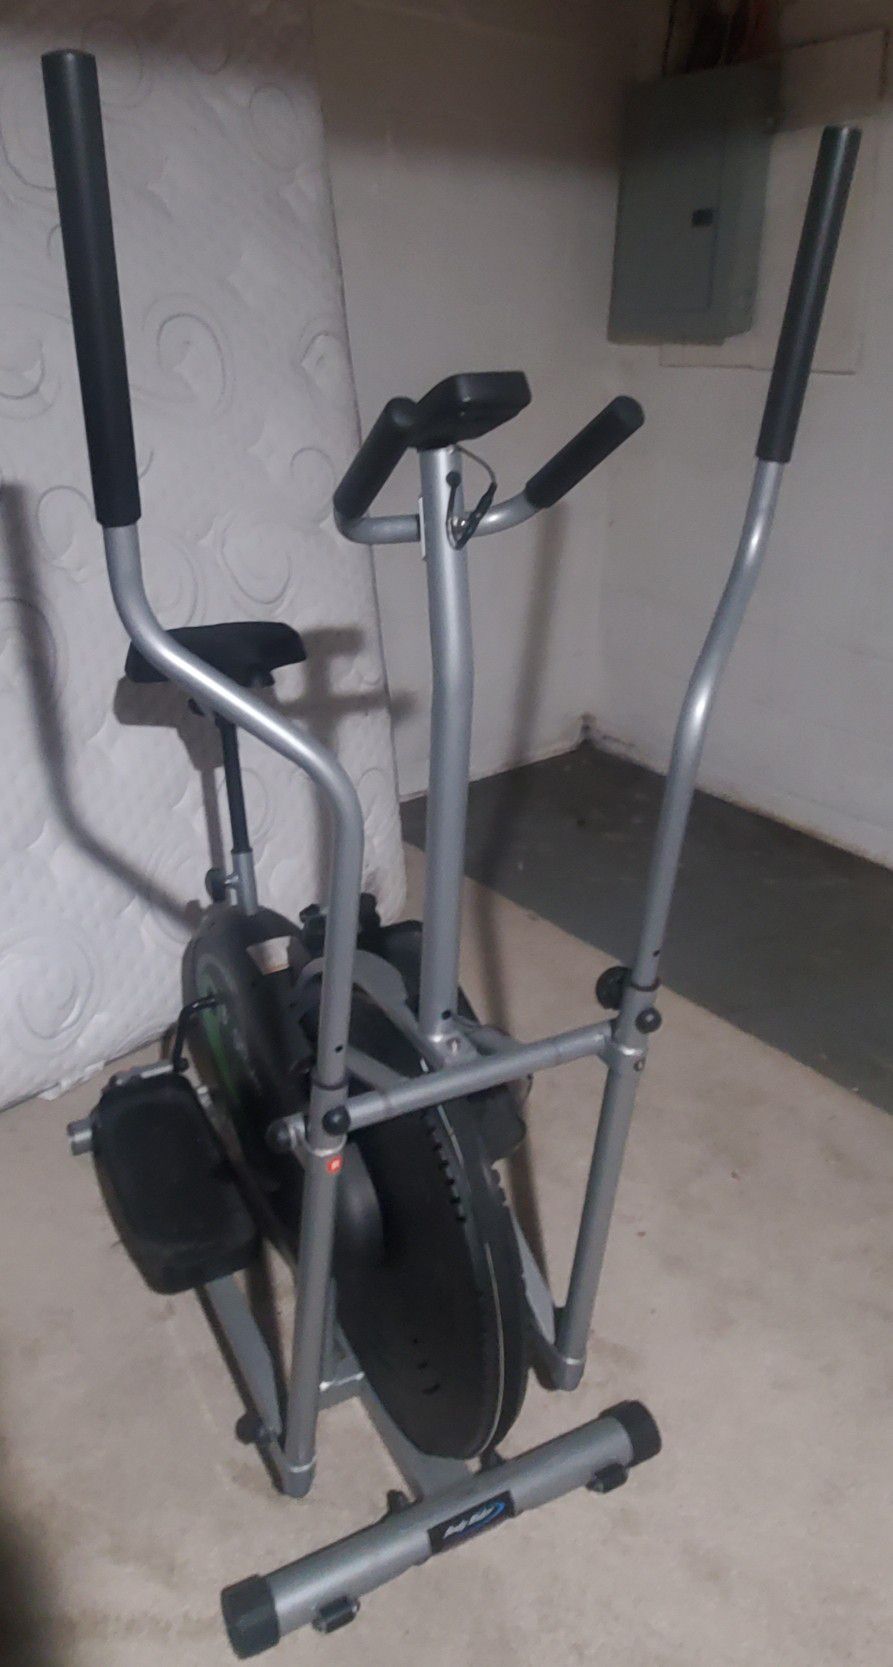 Body Riders Exercise Upright Stationary Fan Bike With Softener & Adjustable Seat 